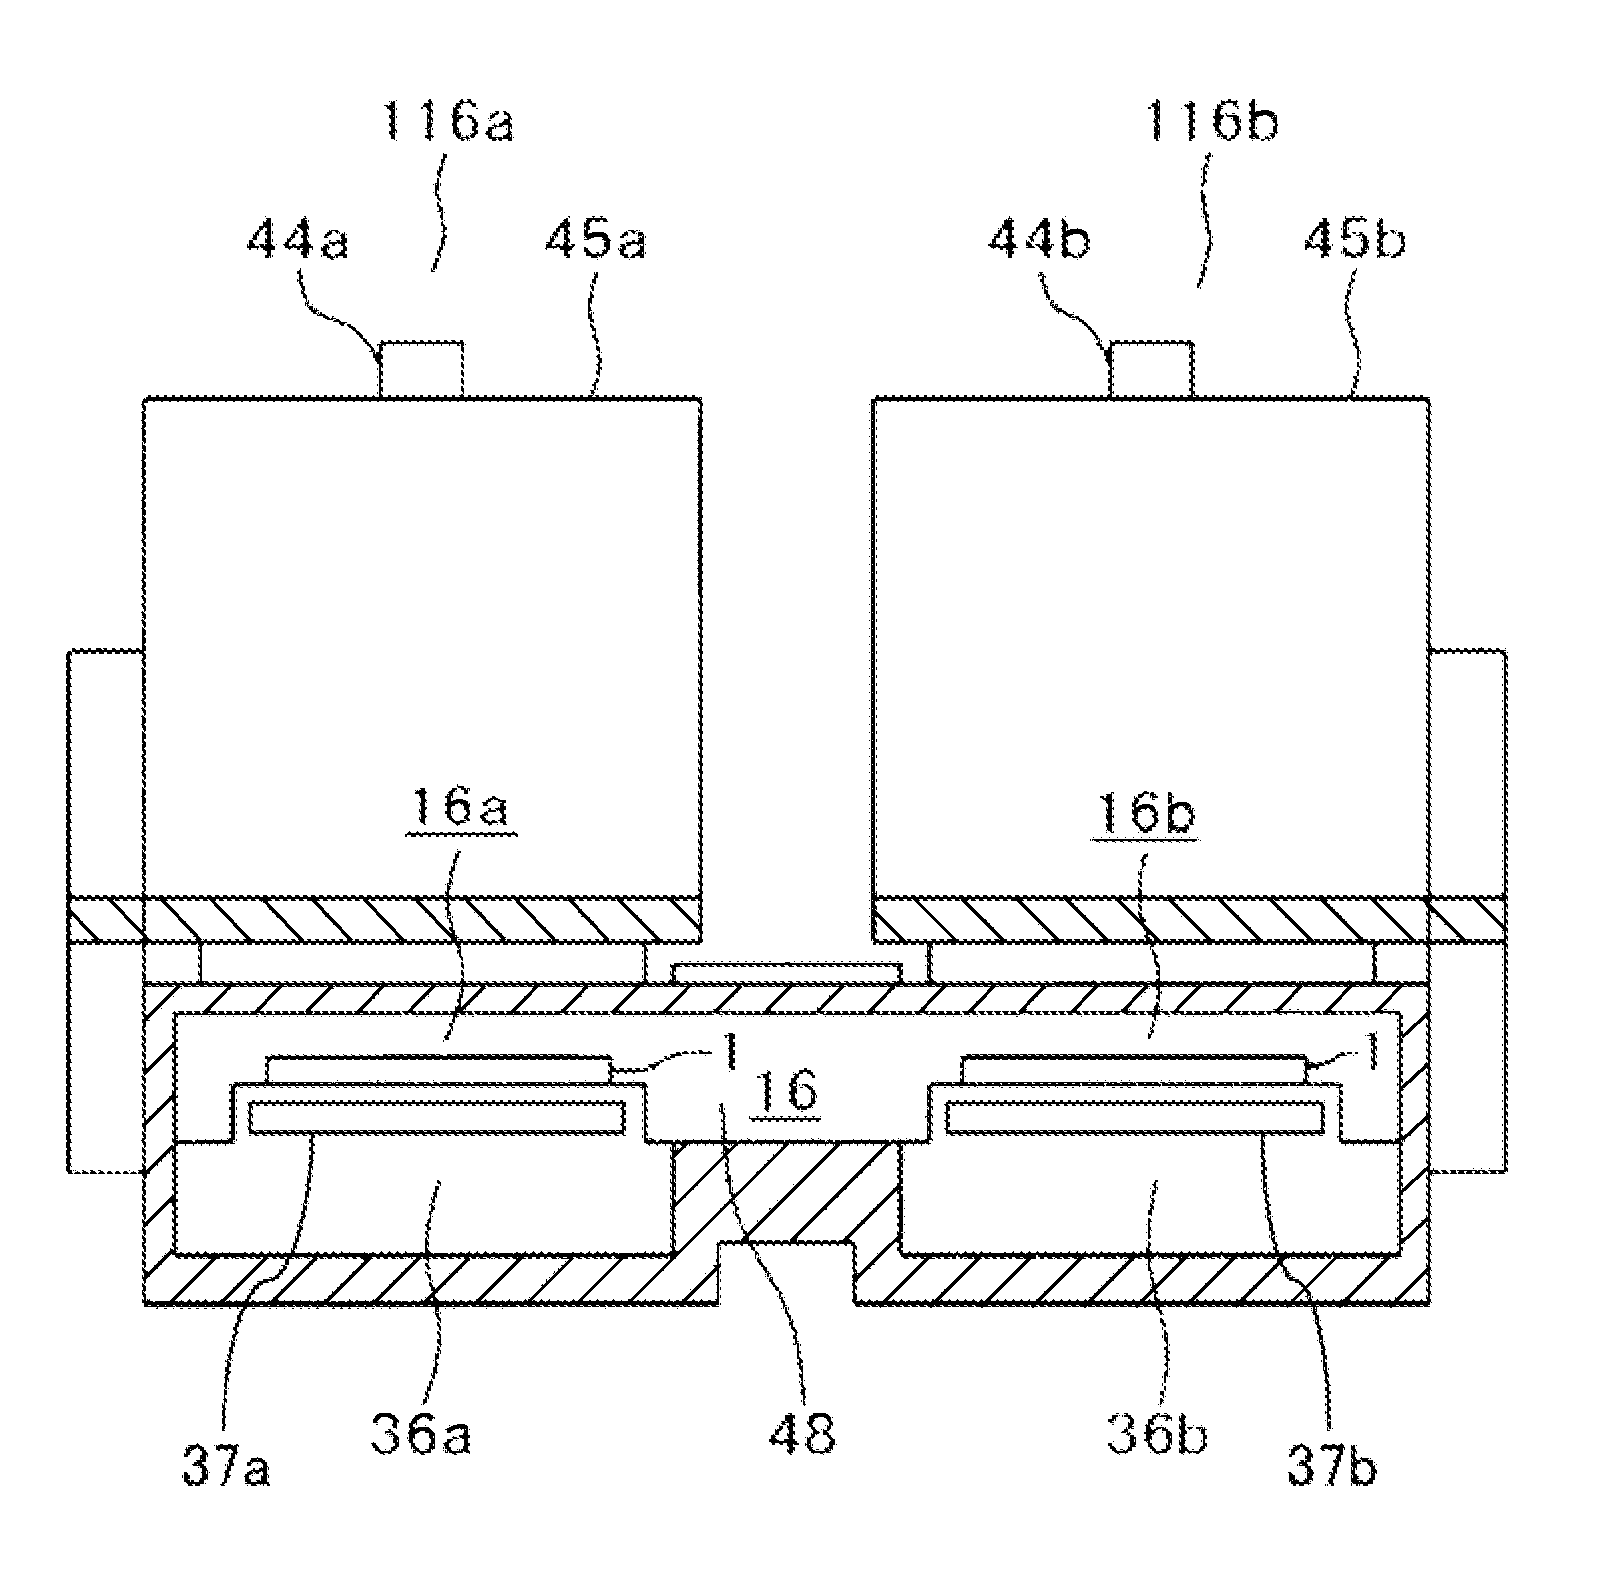 Substrate carrying mechanism, substrate processing apparatus, and semiconductor device manufacturing method